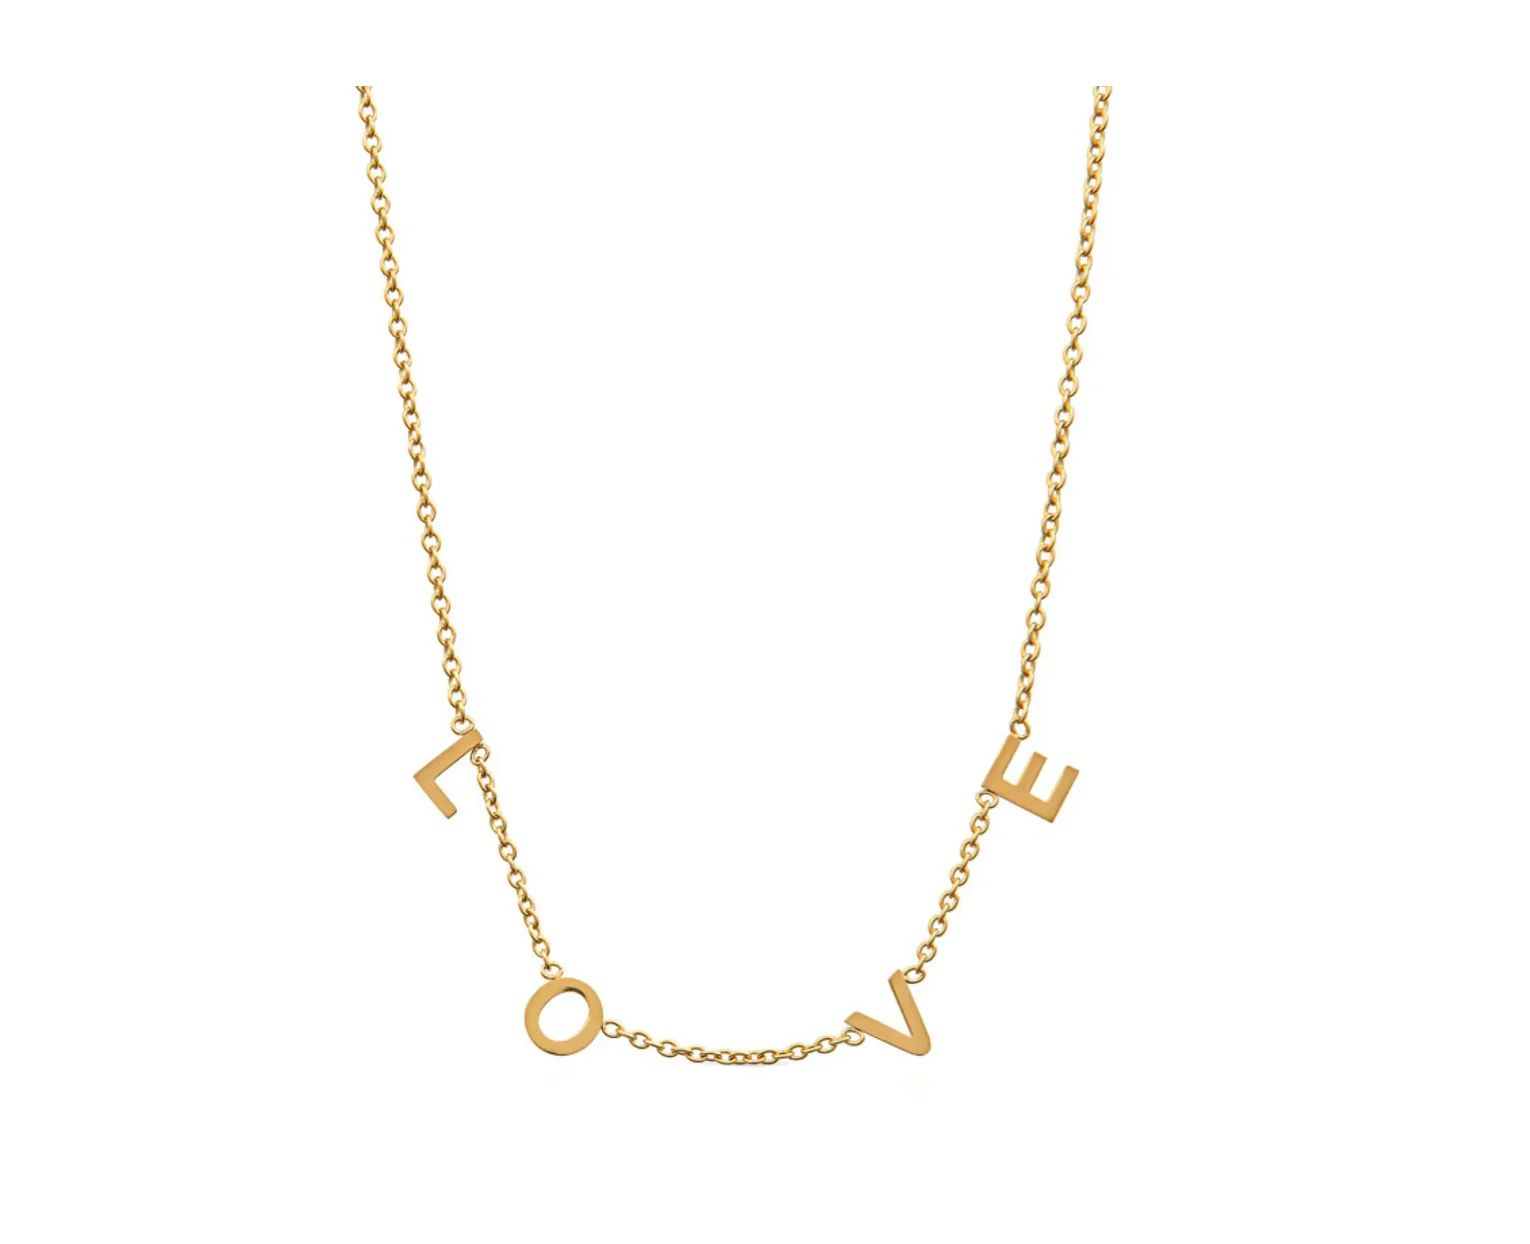 LOVE Necklace by Christina Greene | Support HerStory